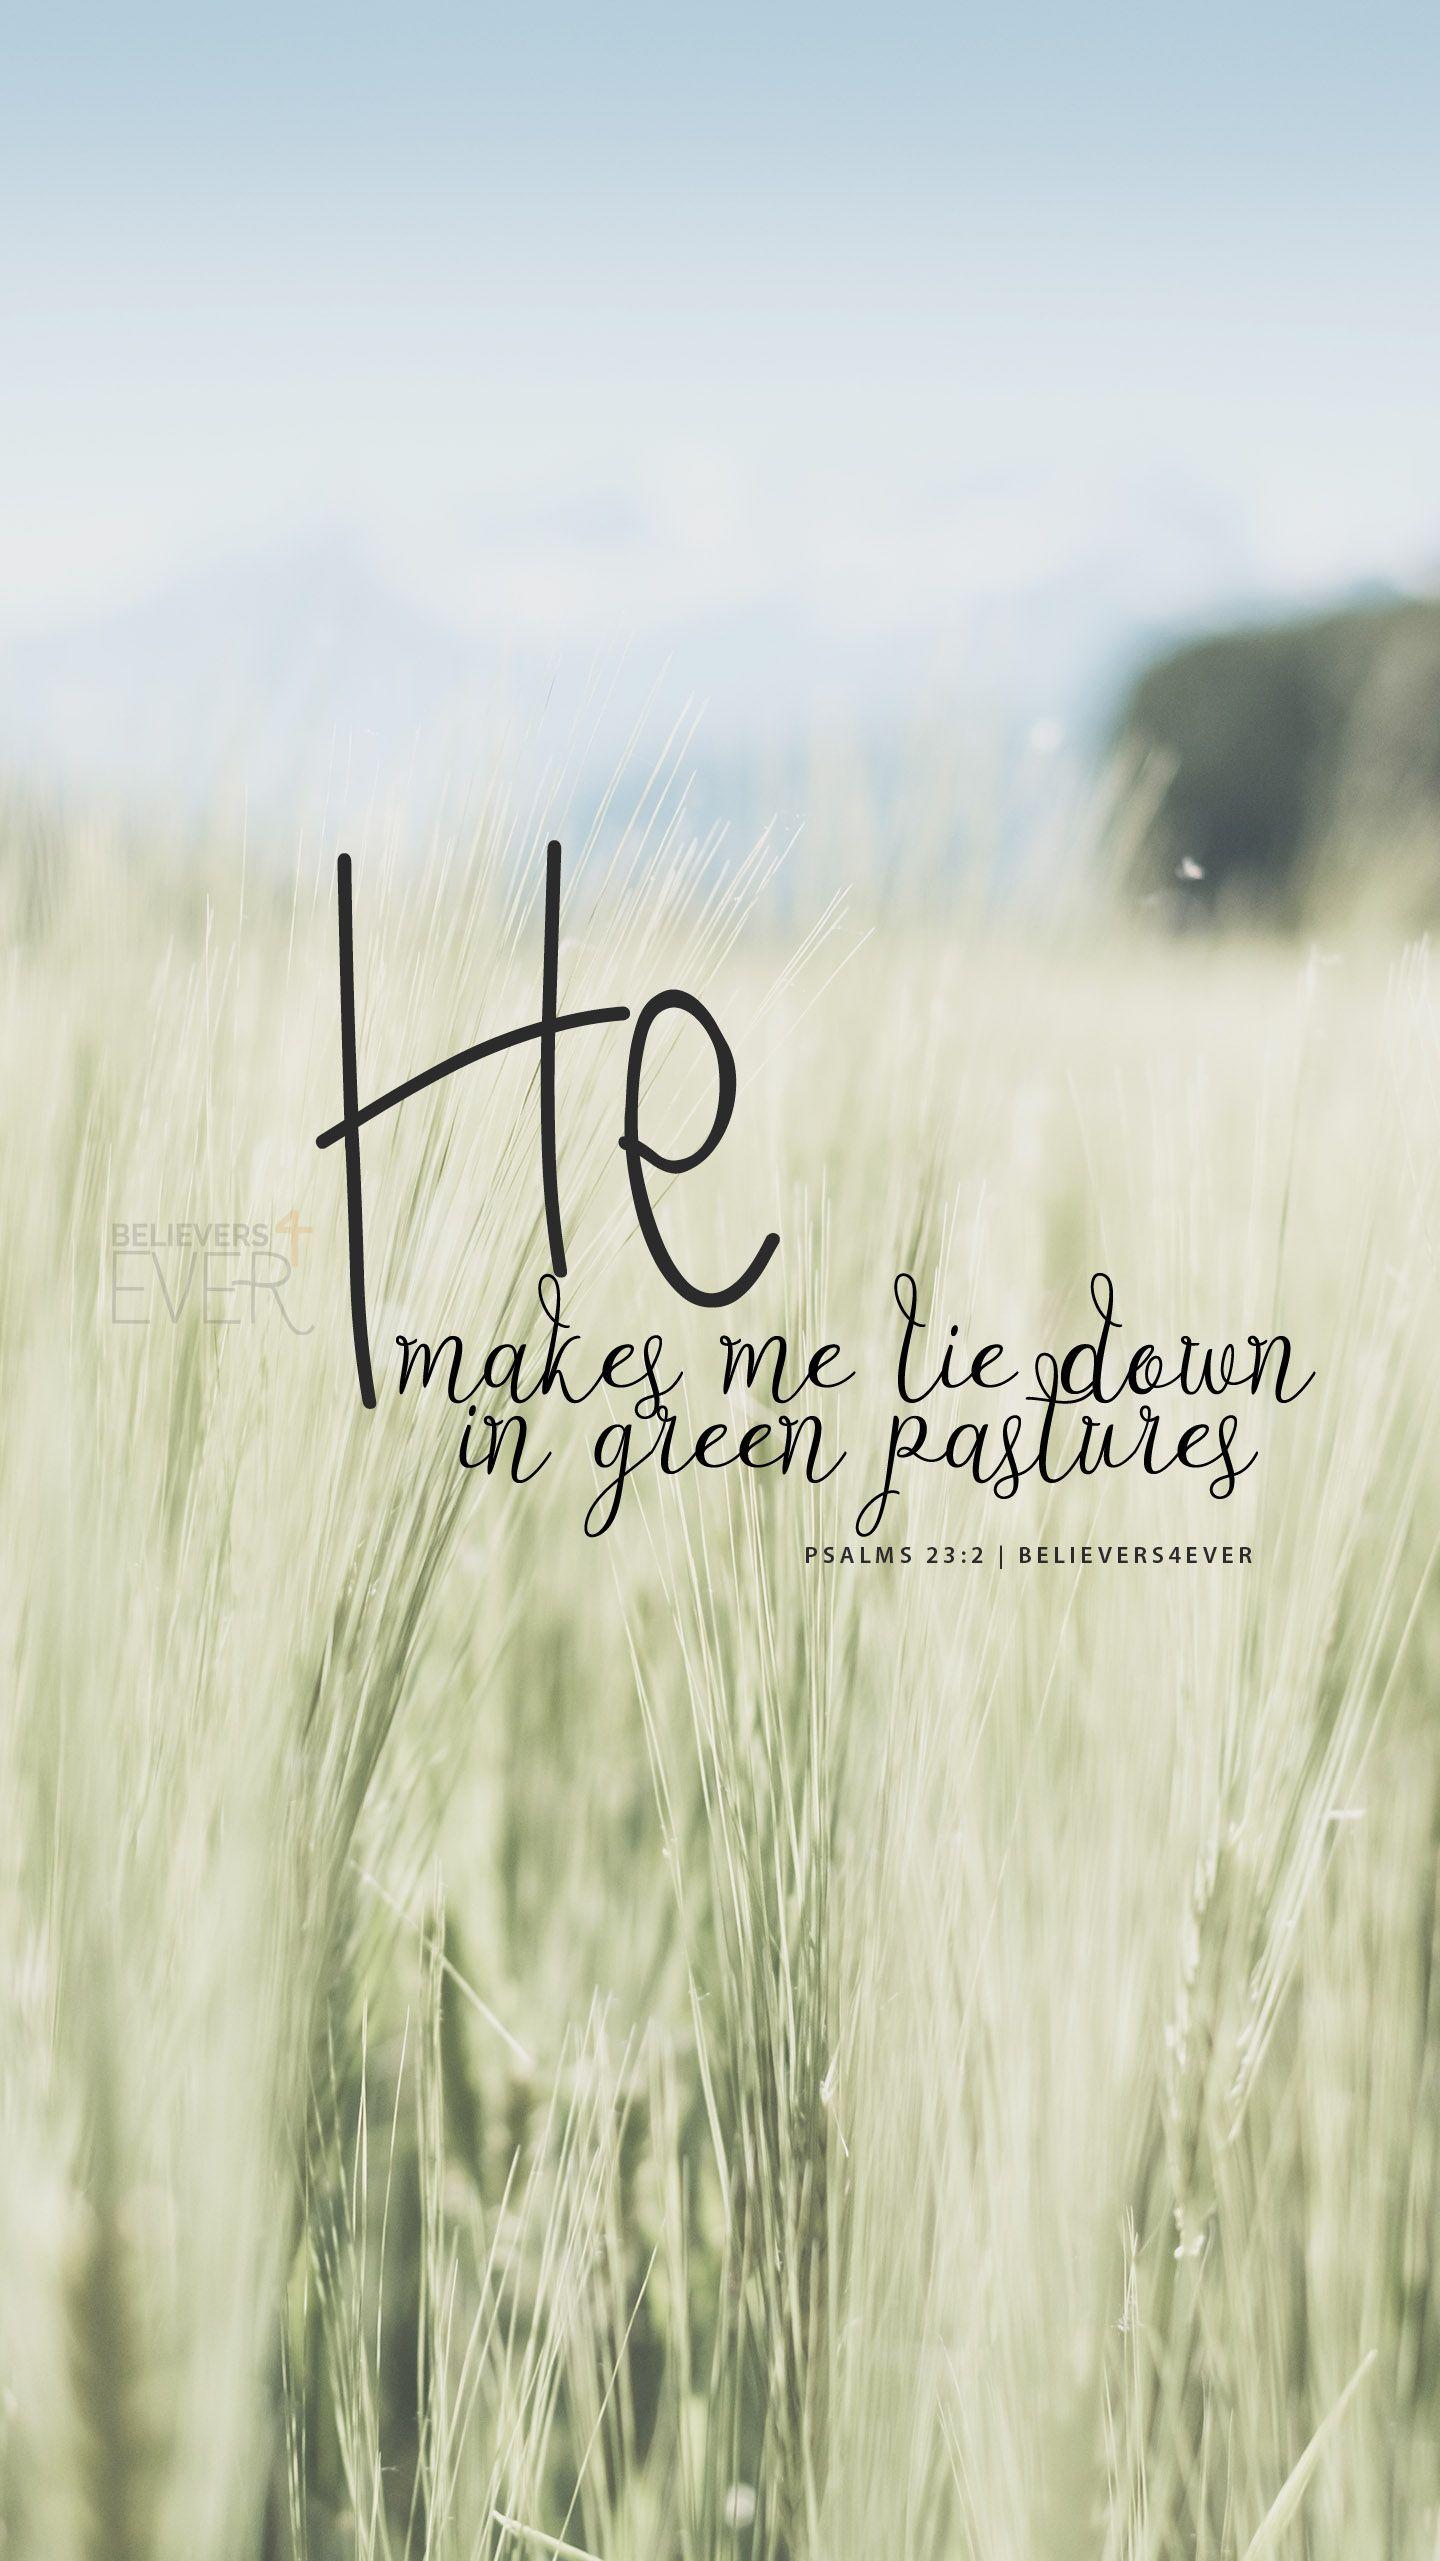 He makes me lie down in green pastures. Psalms 23:2. Free #Christian